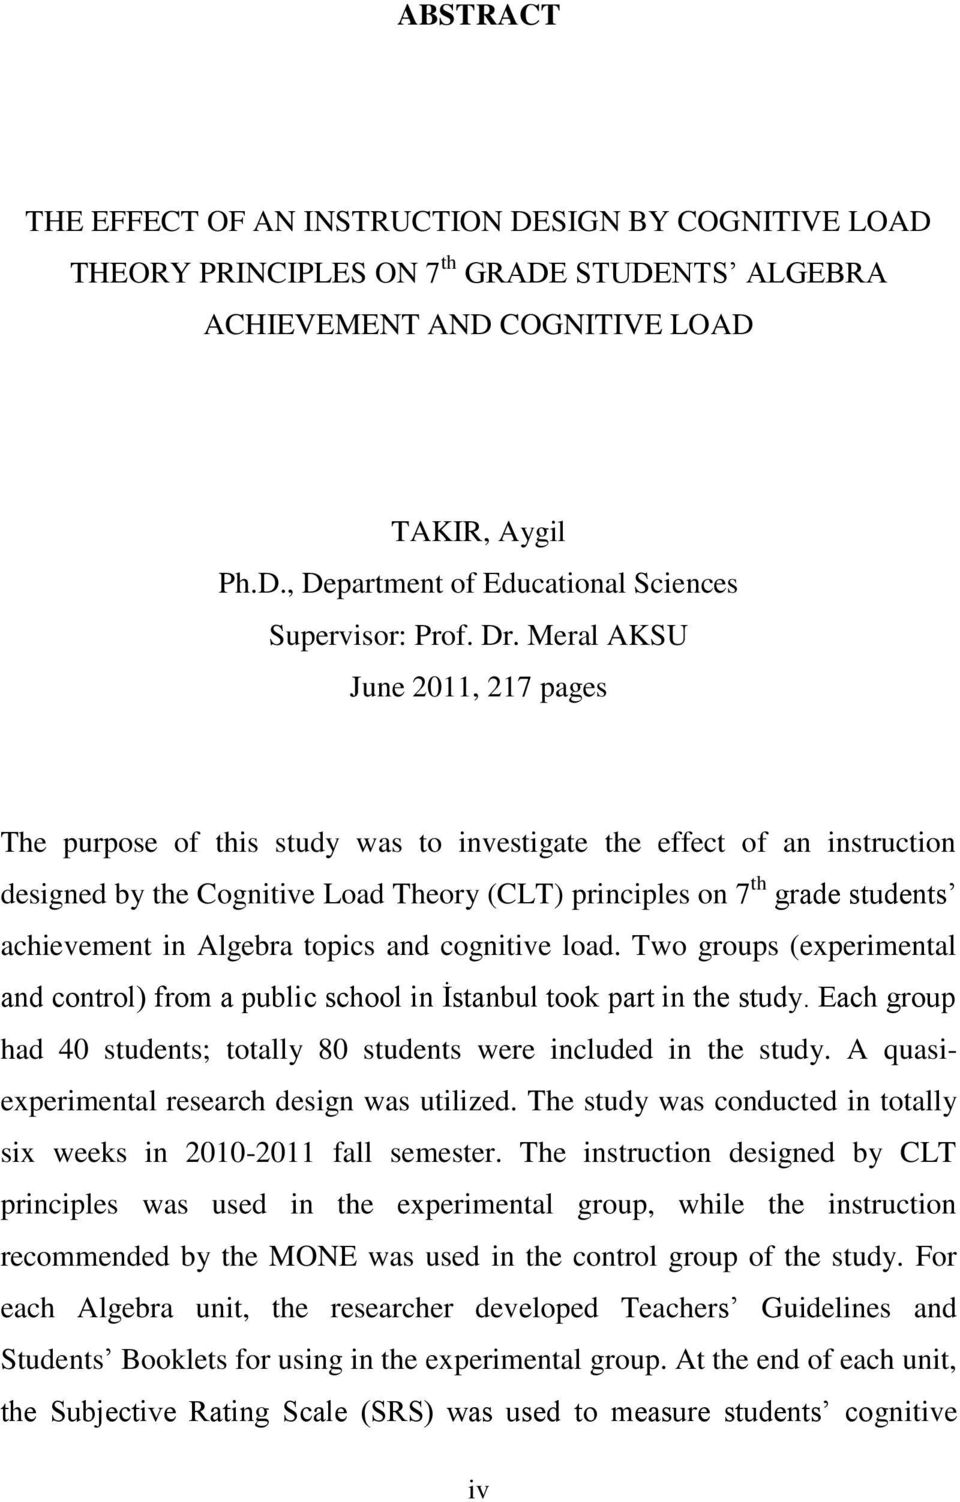 in Algebra topics and cognitive load. Two groups (experimental and control) from a public school in Ġstanbul took part in the study.